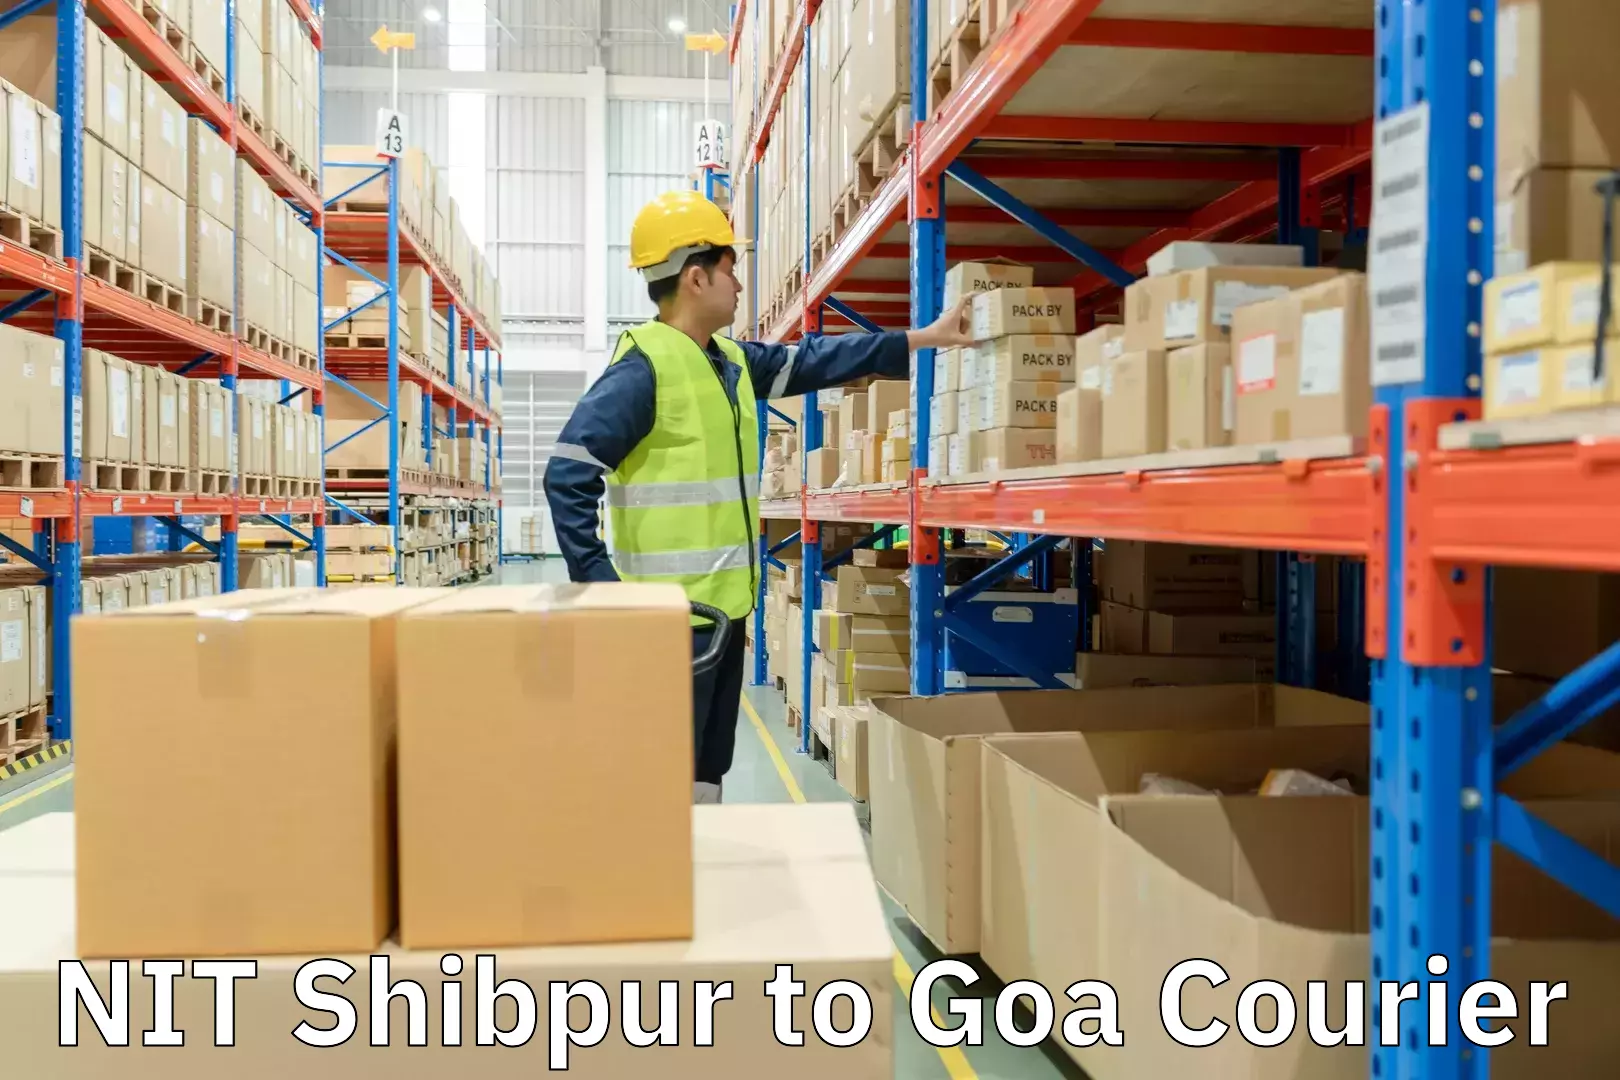 Courier service innovation NIT Shibpur to Goa